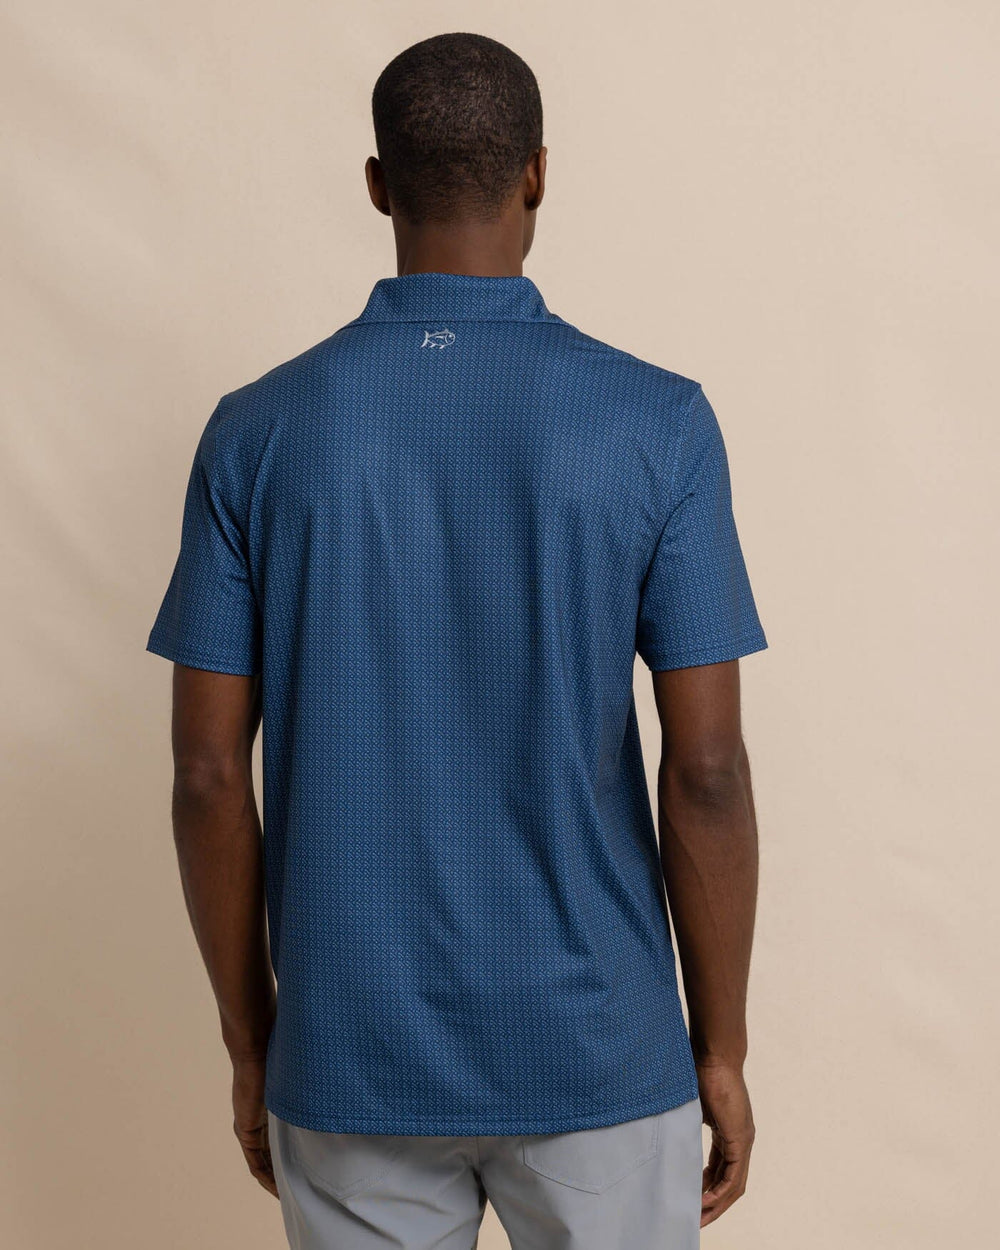 The back view of the Southern Tide Driver Clubbin It Printed Polo by Southern Tide - Aged Denim